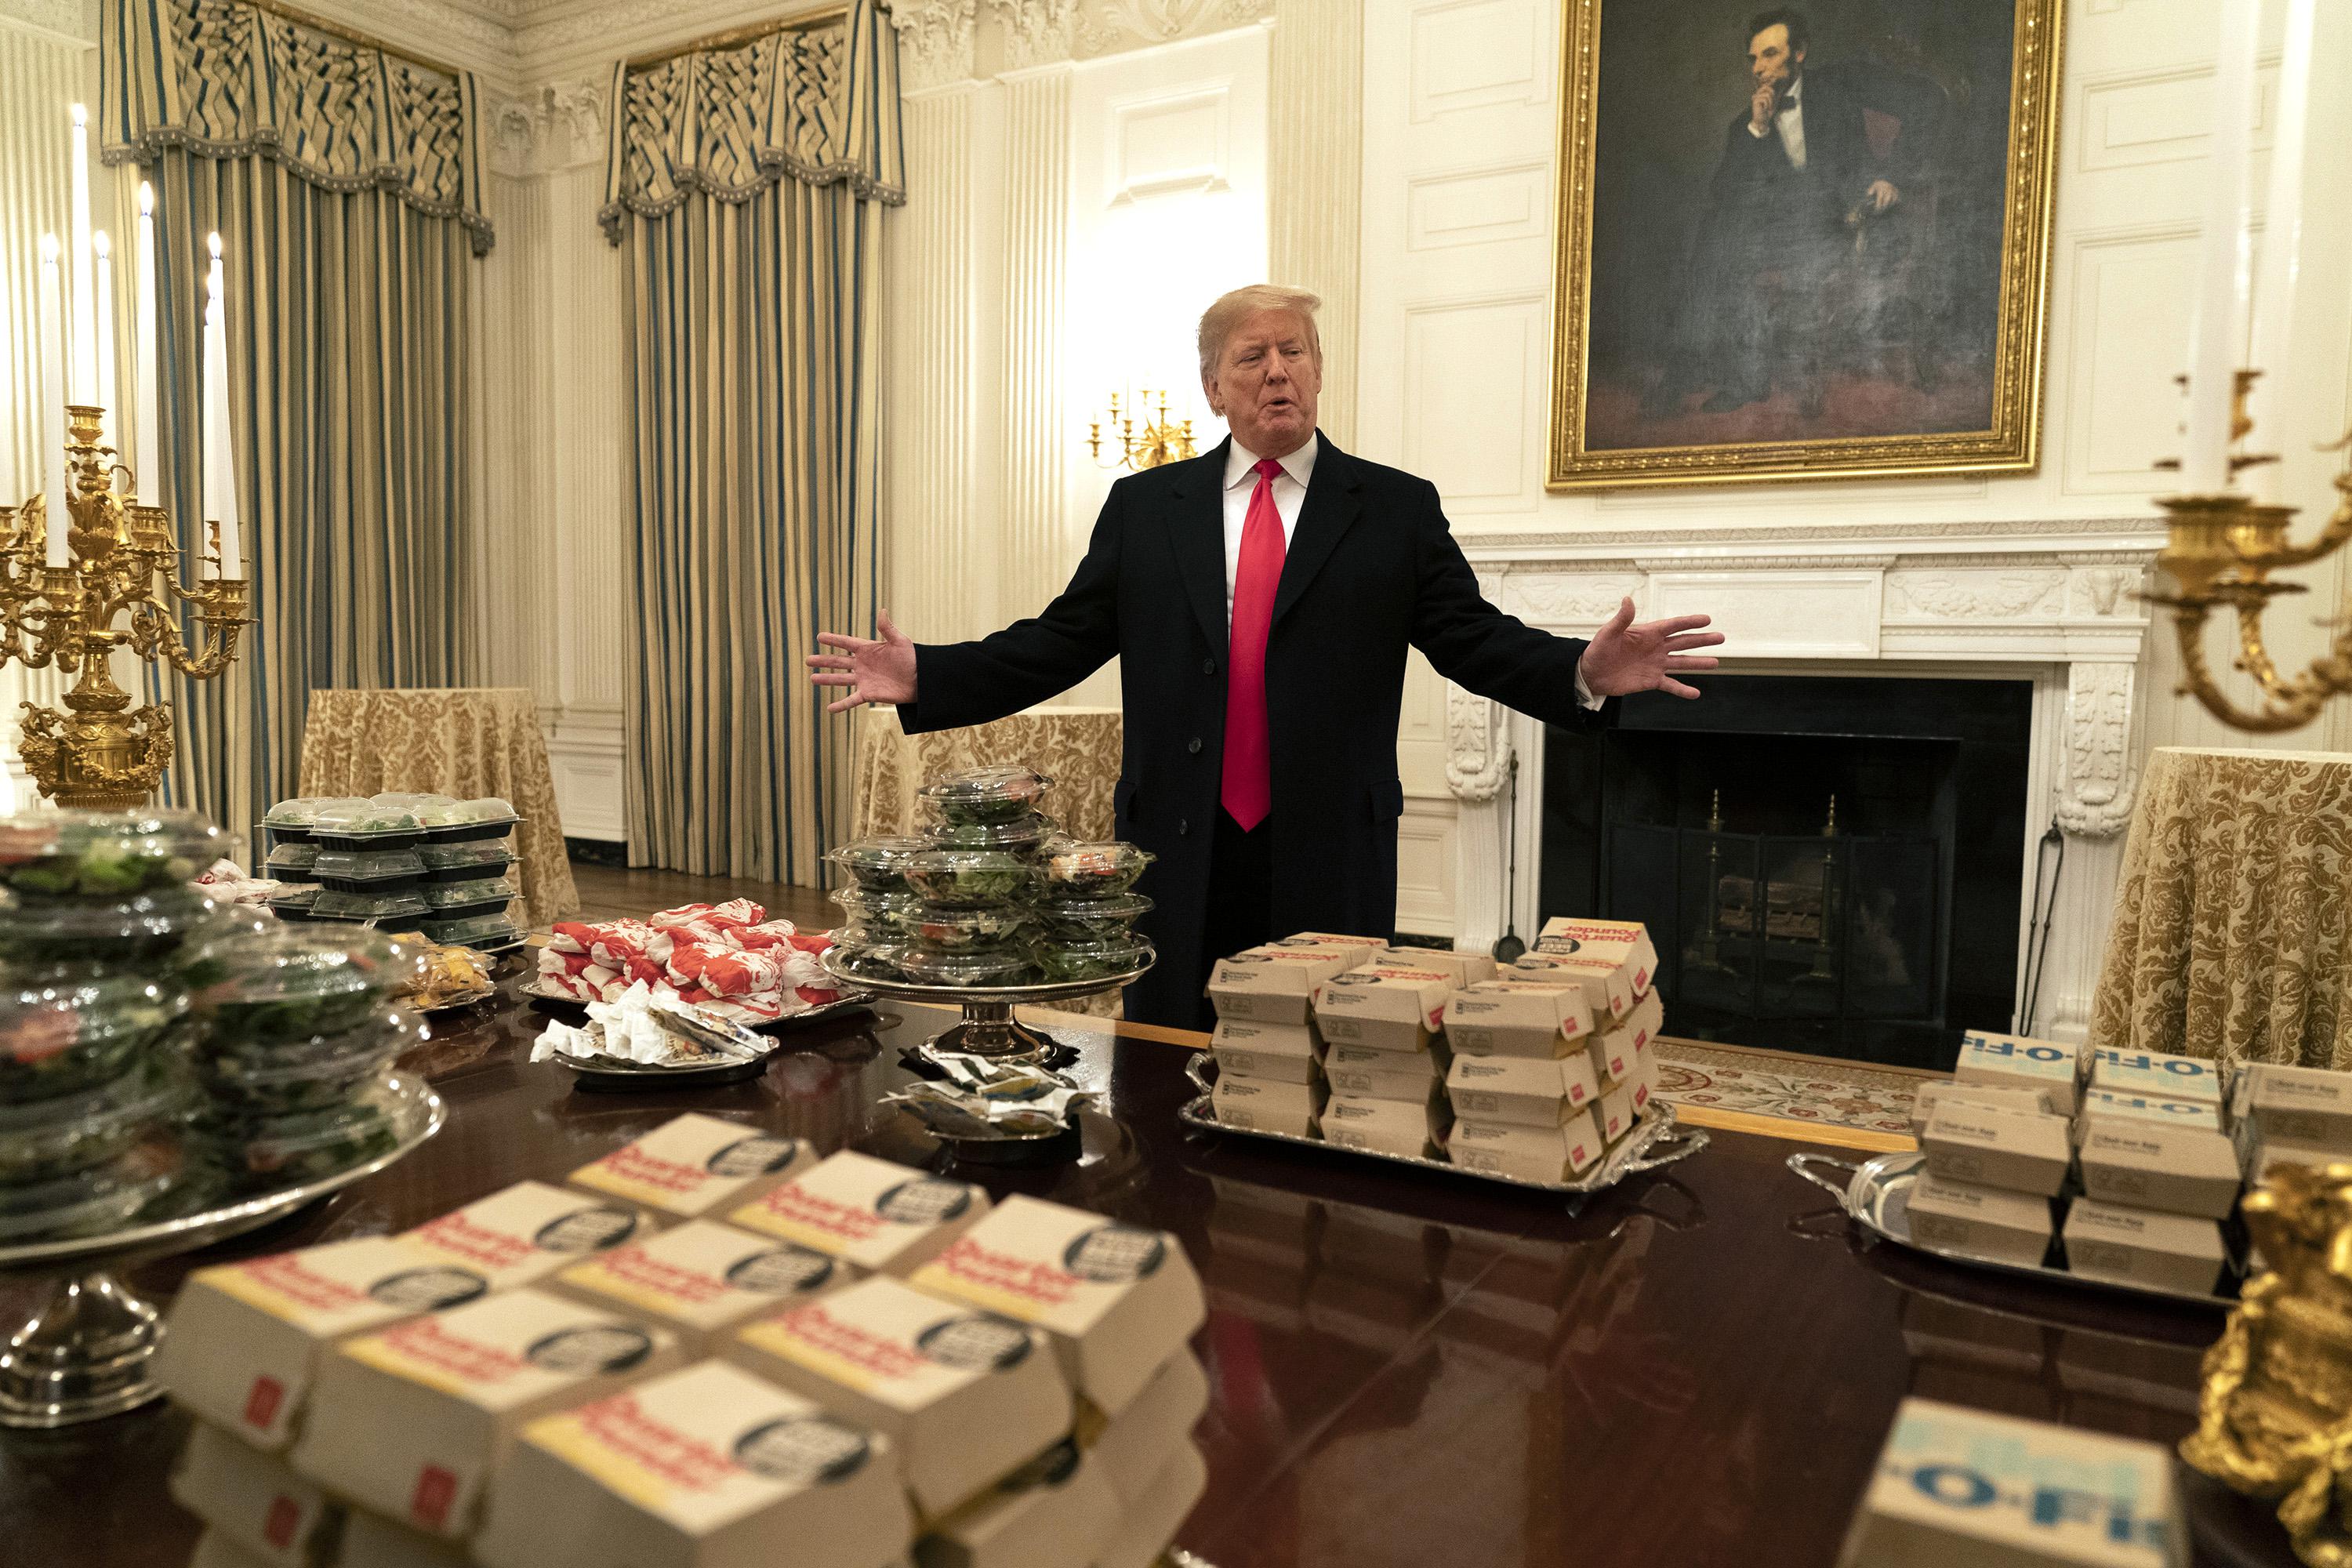 President Trump in front of the fast food to be served to the Clemson Tigers football team to celebrate their Championship at the White House on January 14, 2019 in Washington, DC.